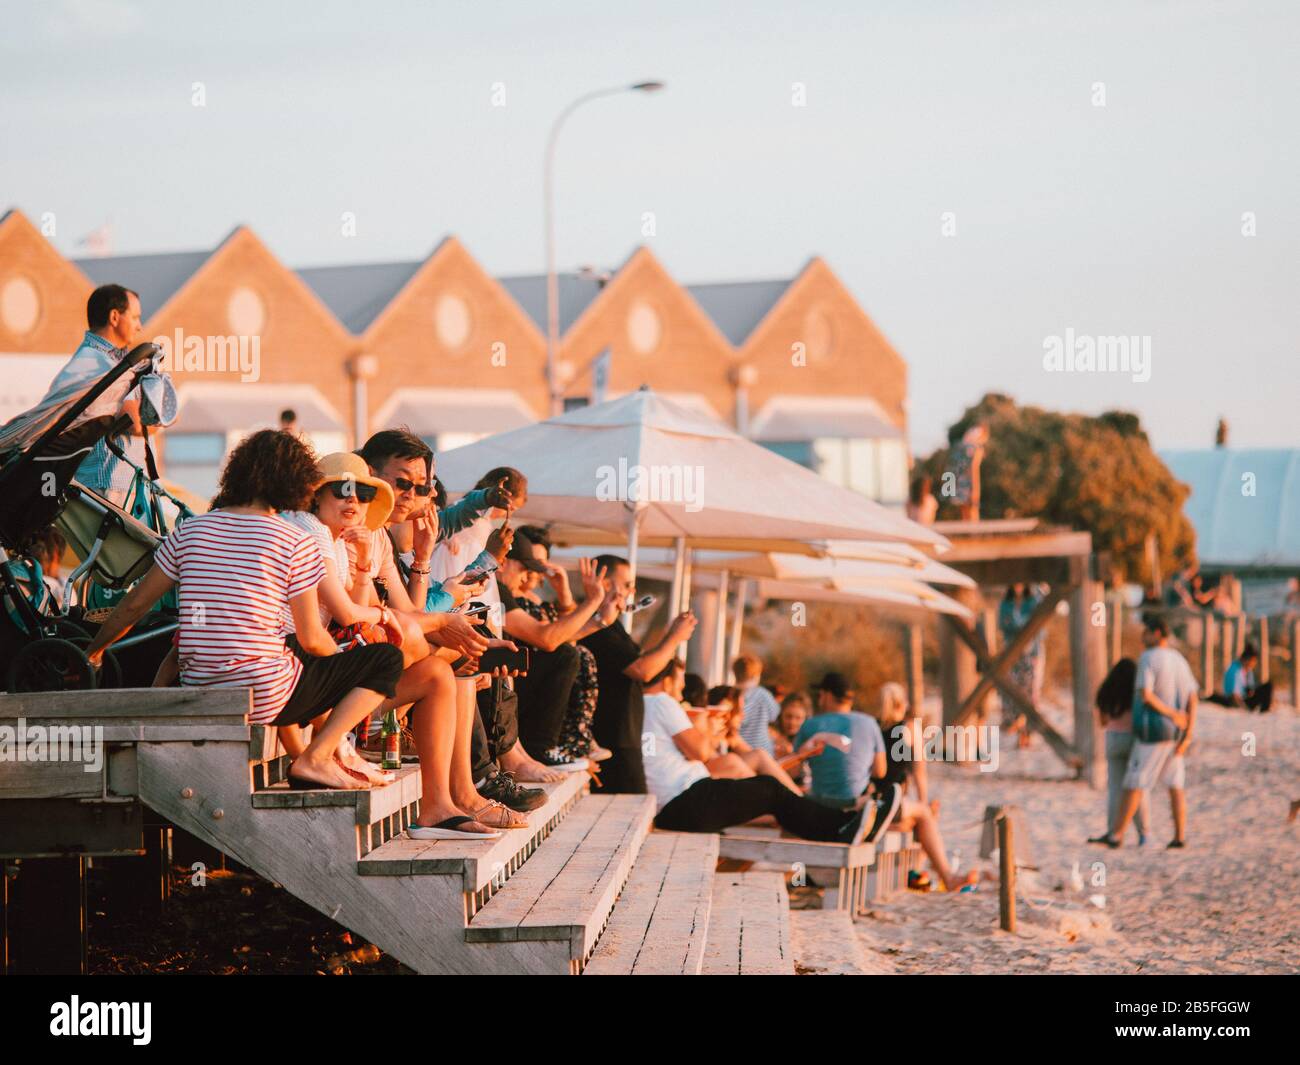 Some Australian locals sitting on some steps adjacent to the beach in Australia Stock Photo